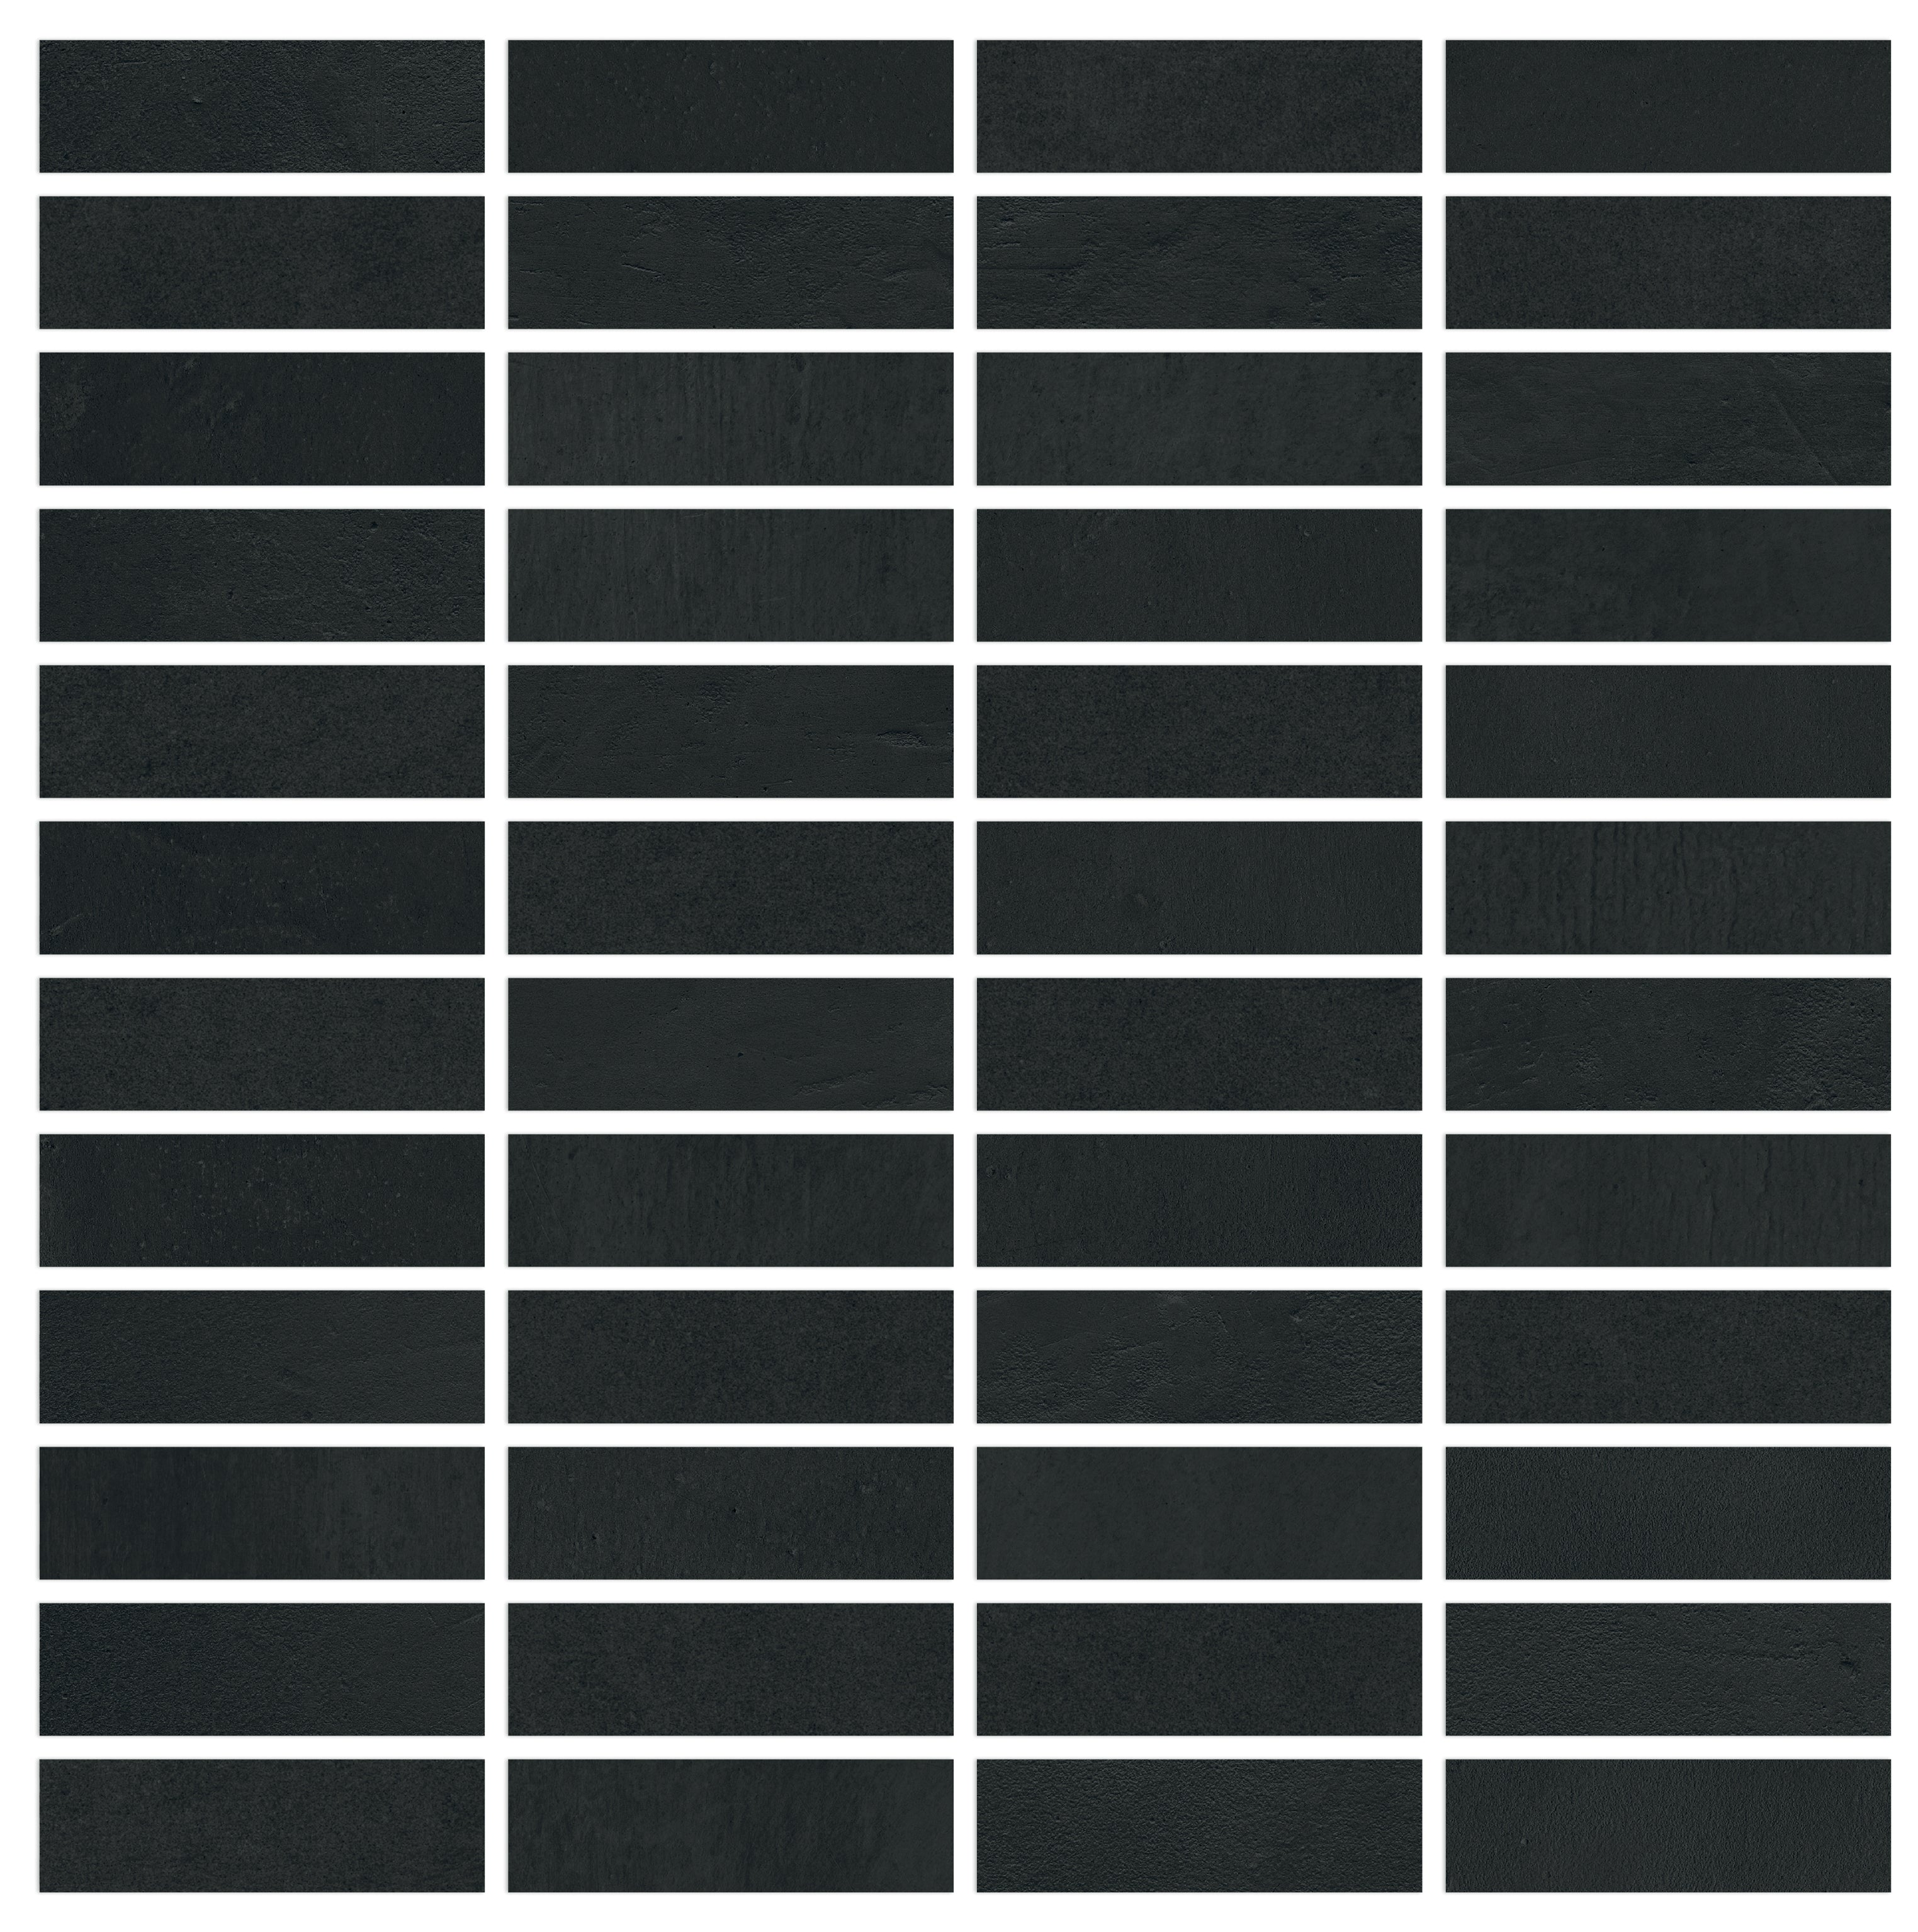 landmark 9mm vision color star black straight stack 1x3 mosaic 12x12x9mm matte rectified porcelain tile distributed by surface group international